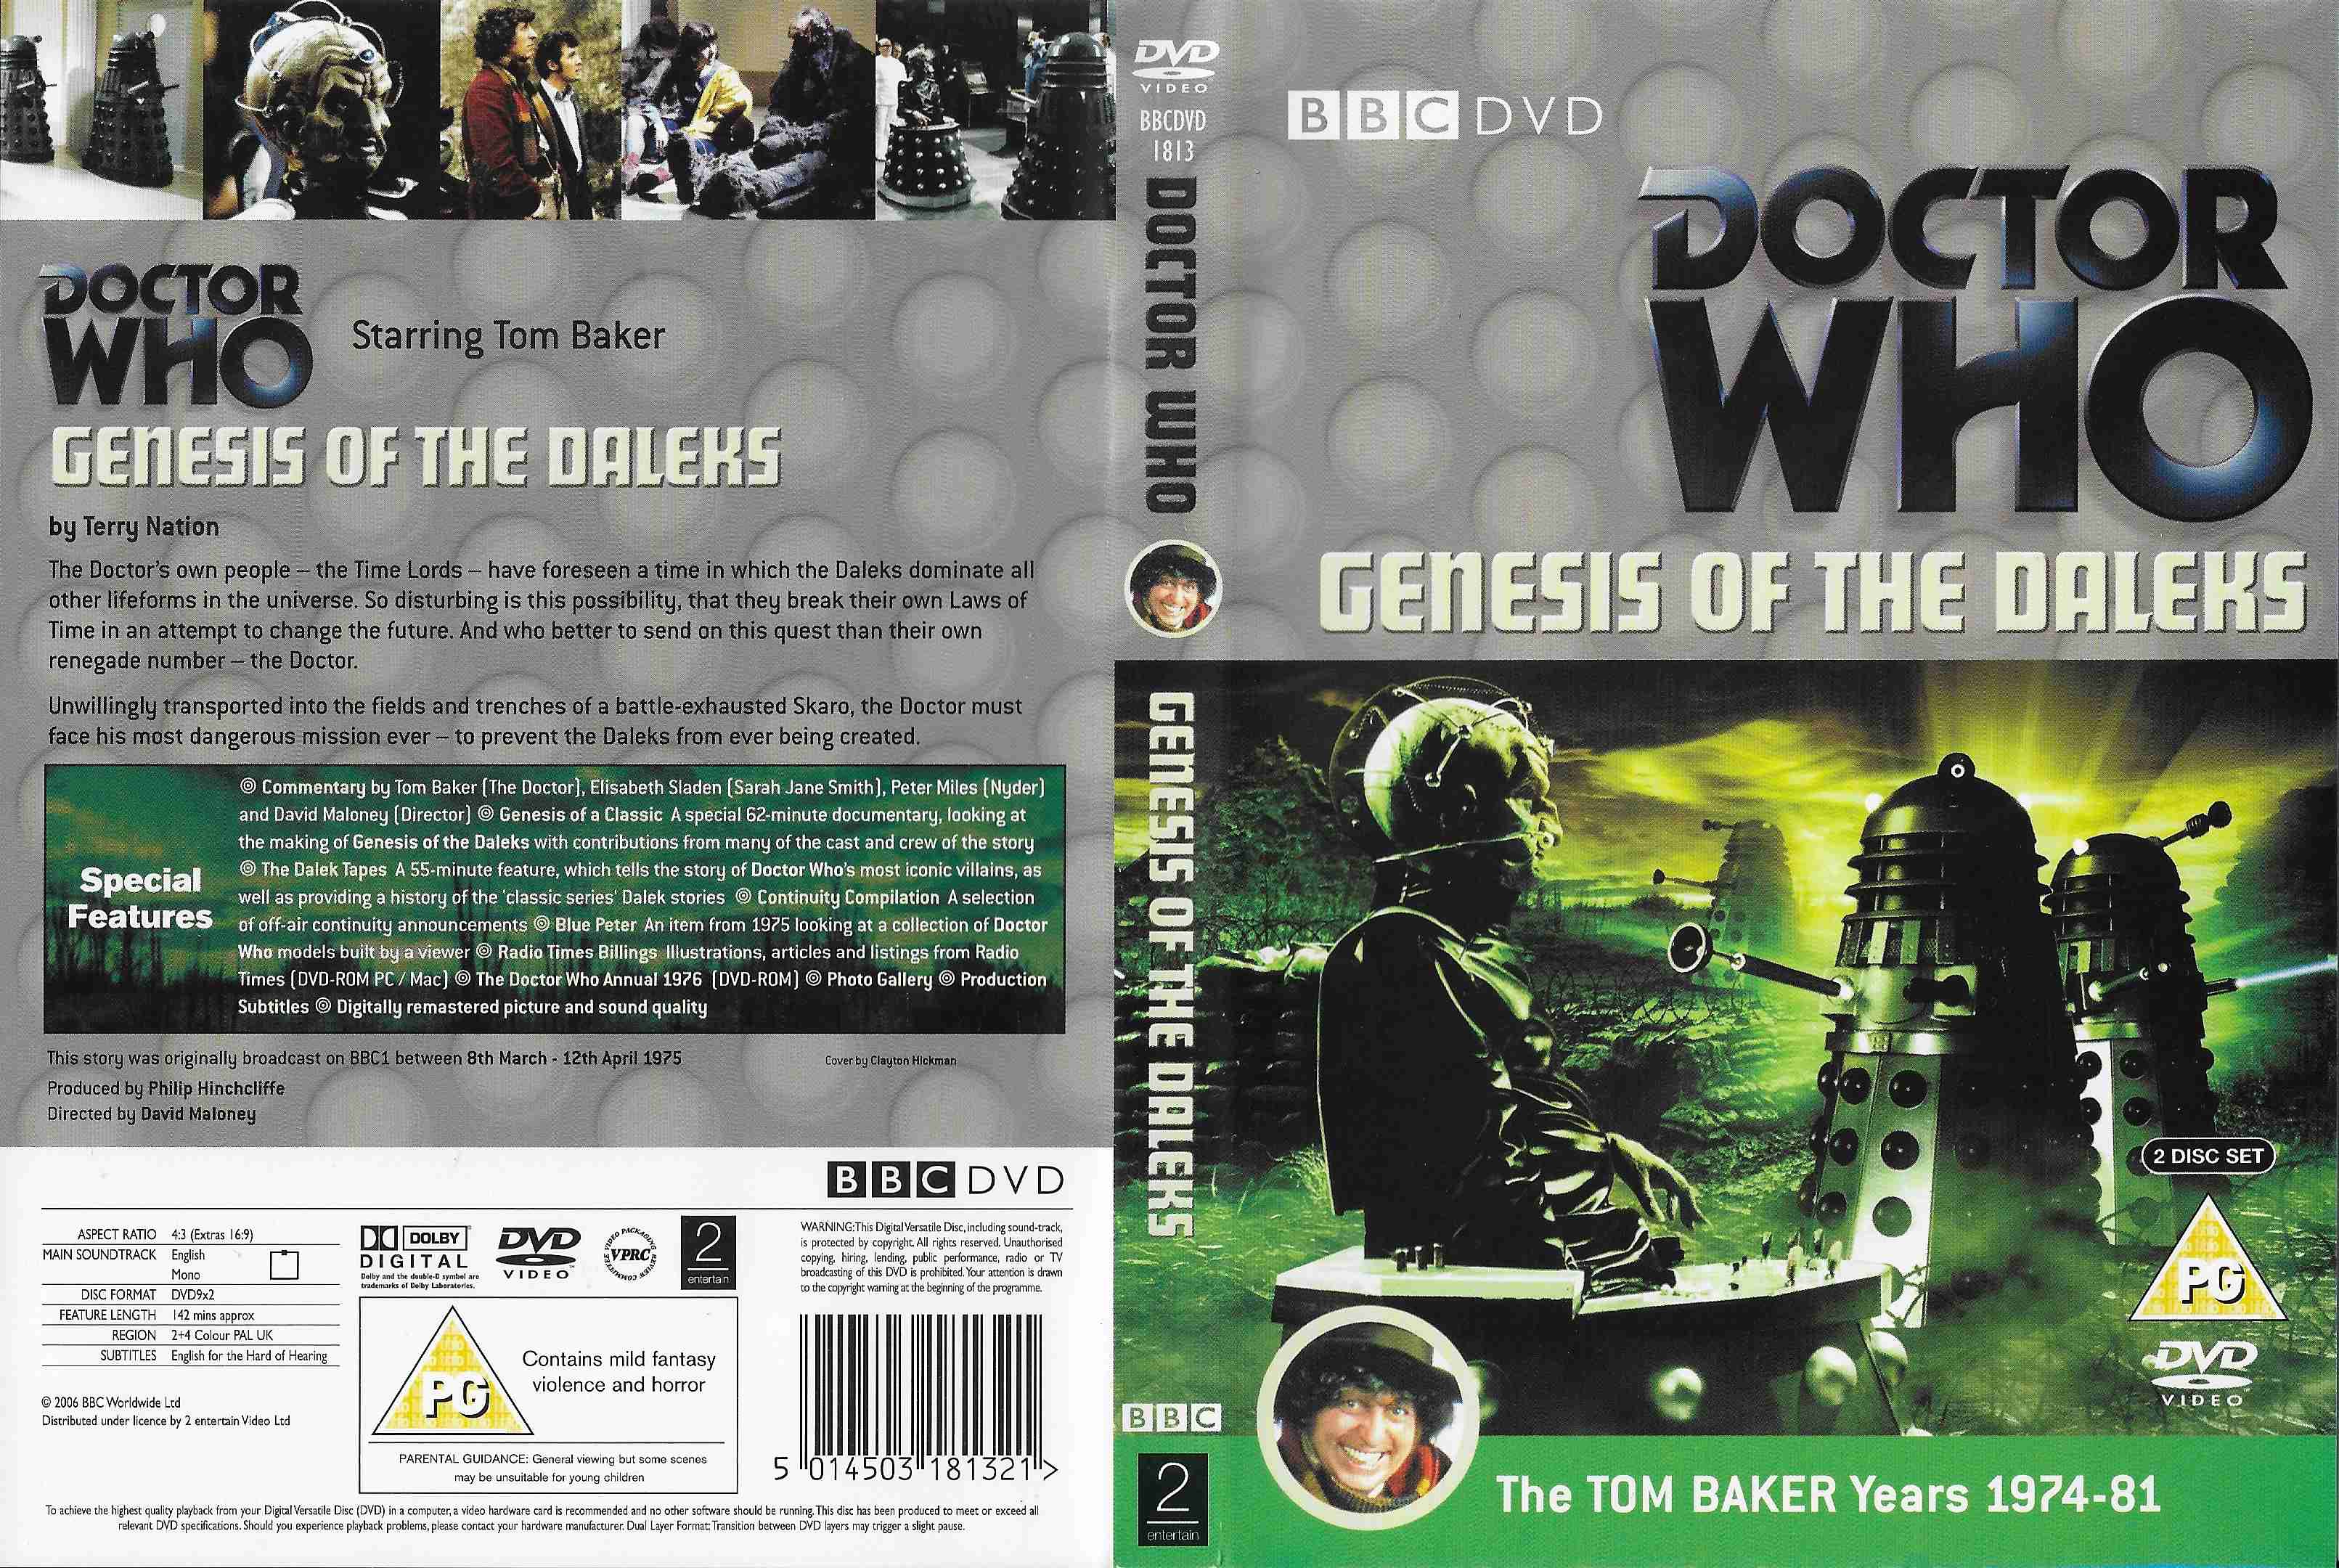 Picture of BBCDVD 1813 Doctor Who - Genesis of the Daleks by artist Terry Nation from the BBC records and Tapes library